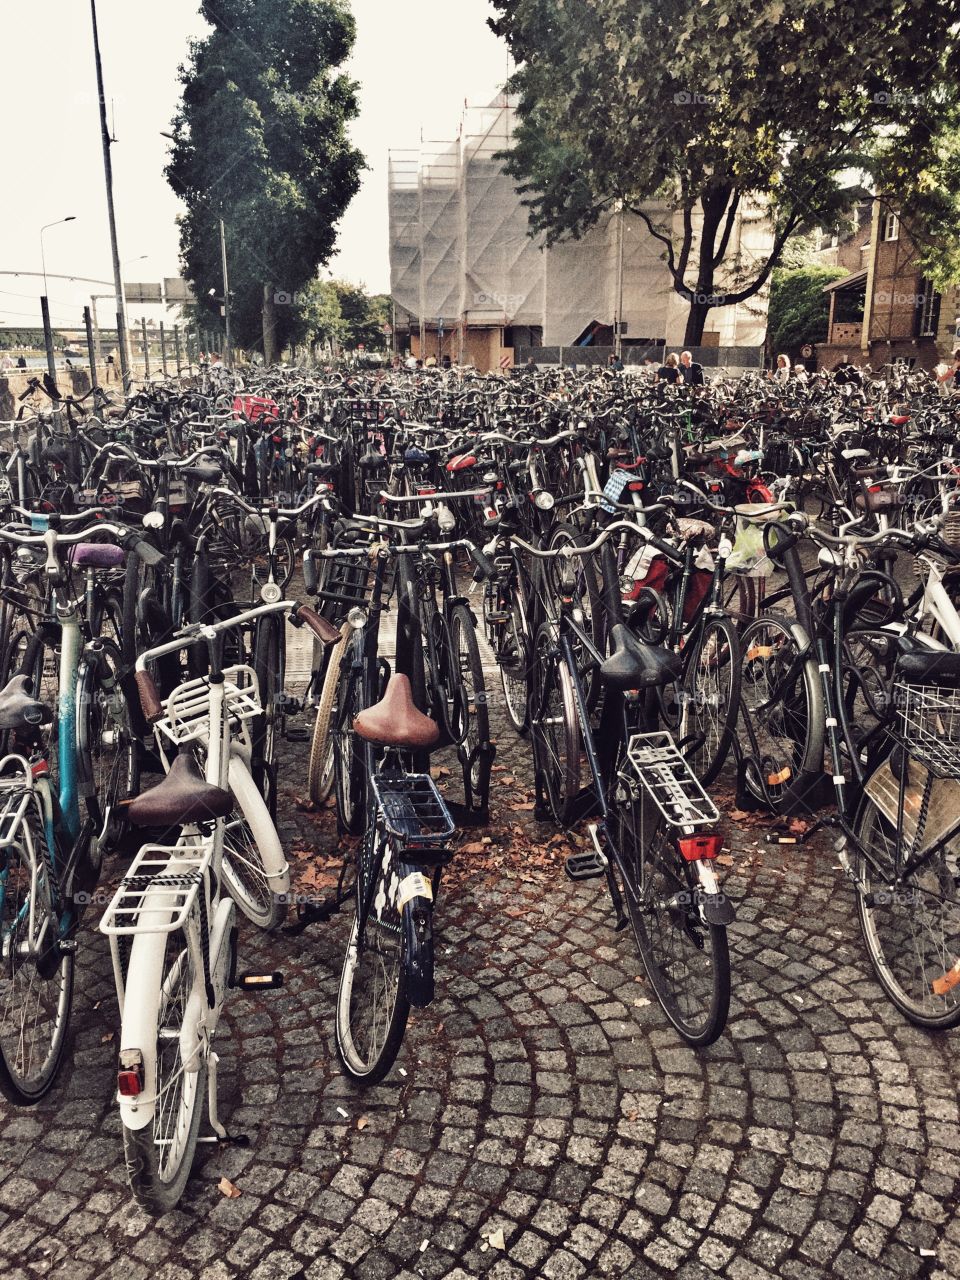 Bicycles in park